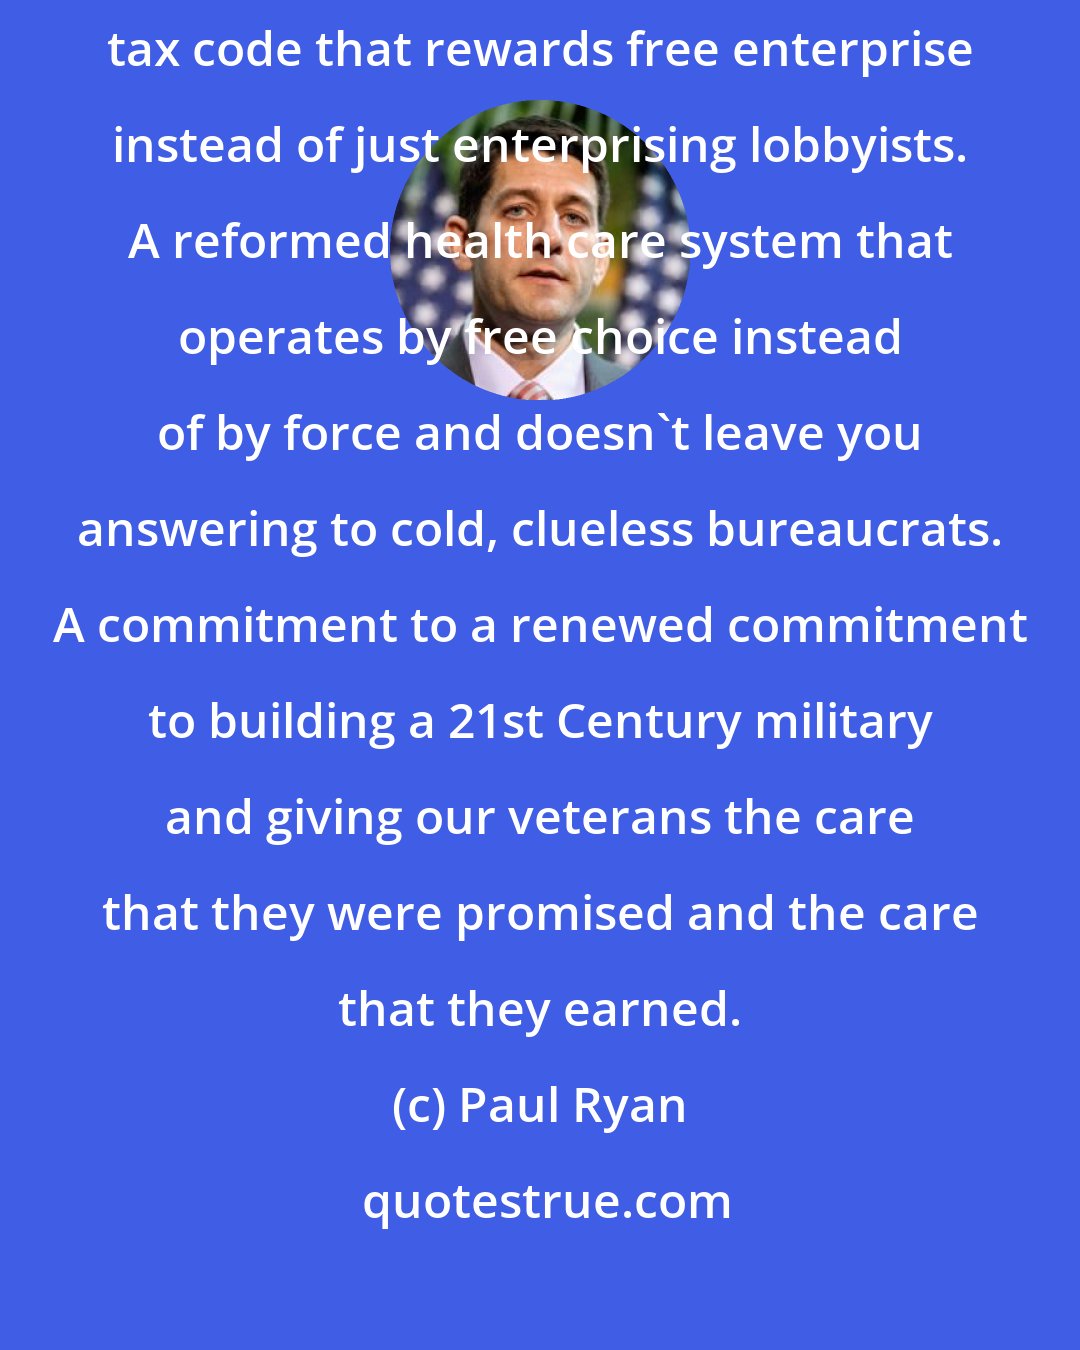 Paul Ryan: I offer a better way for America with ideas that actually work, a reformed tax code that rewards free enterprise instead of just enterprising lobbyists. A reformed health care system that operates by free choice instead of by force and doesn't leave you answering to cold, clueless bureaucrats. A commitment to a renewed commitment to building a 21st Century military and giving our veterans the care that they were promised and the care that they earned.